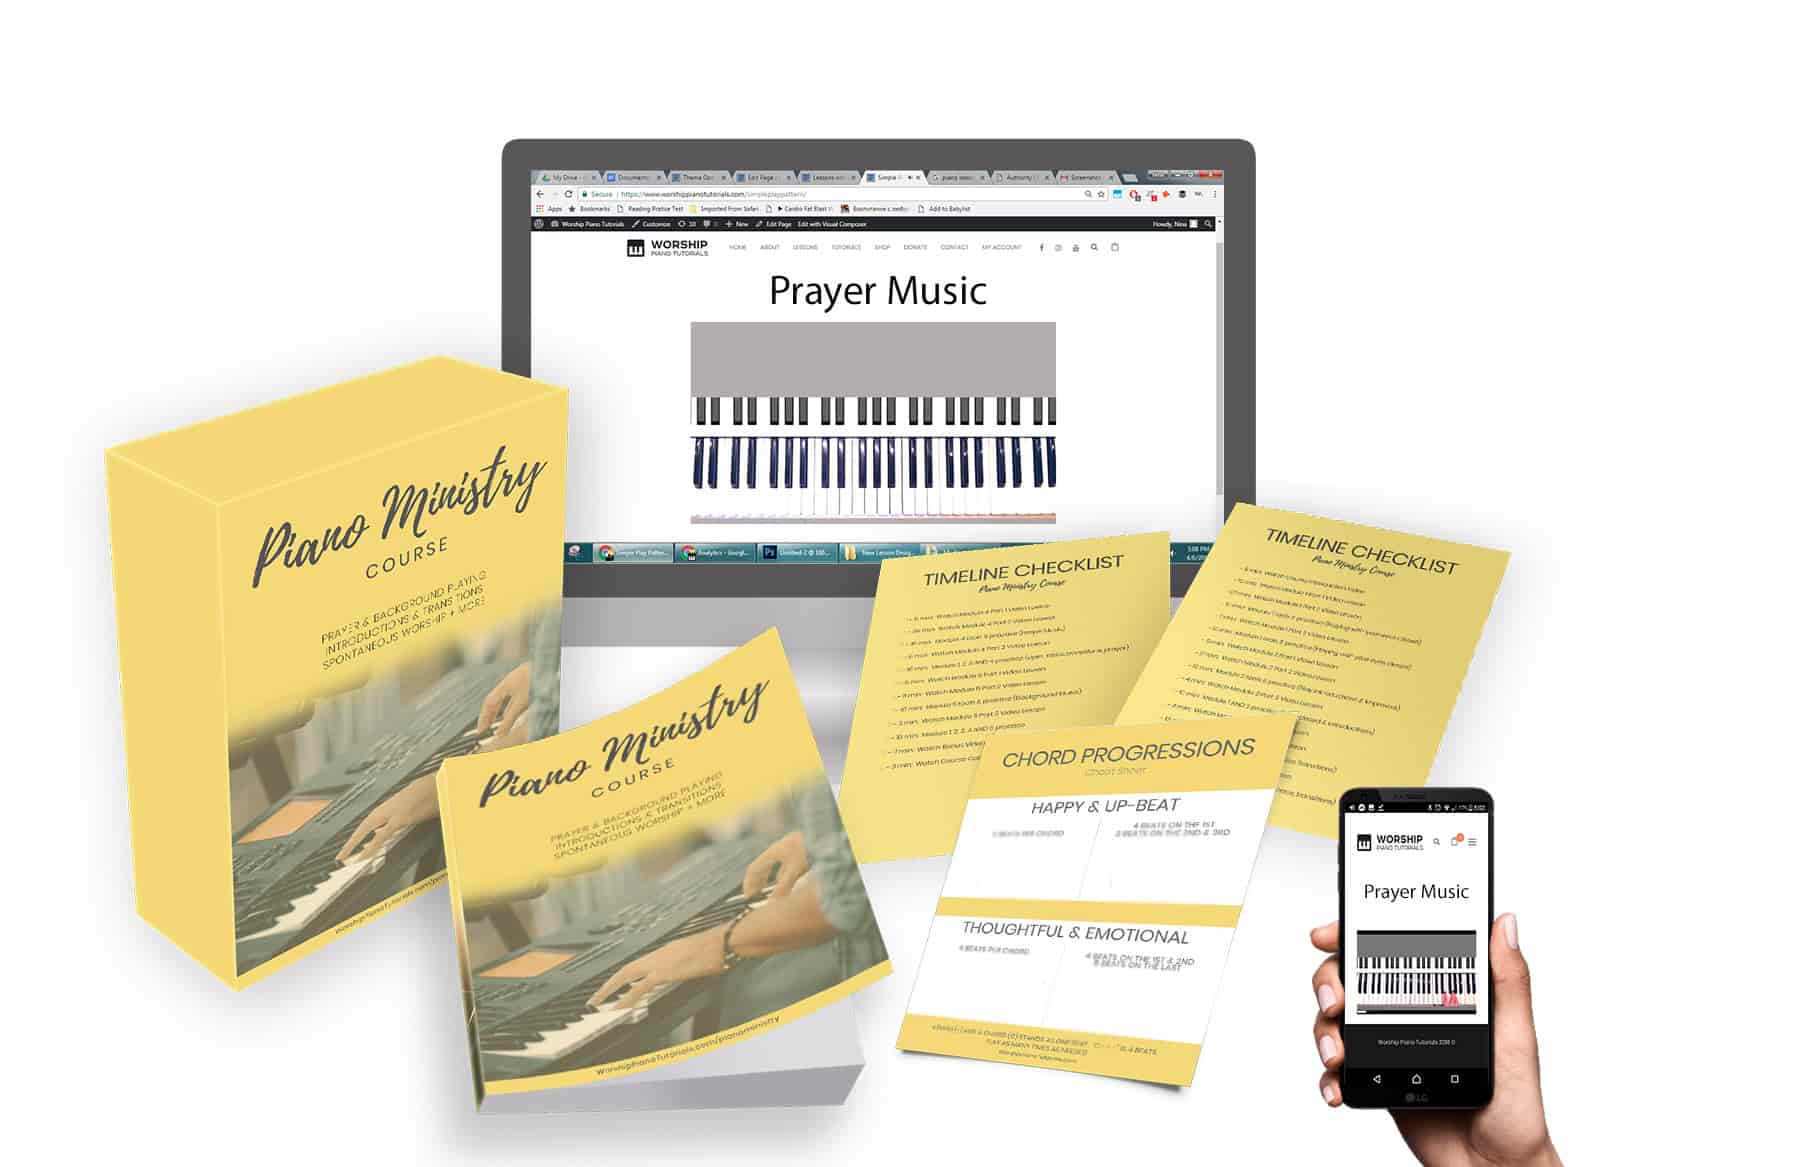 Piano Ministry Course